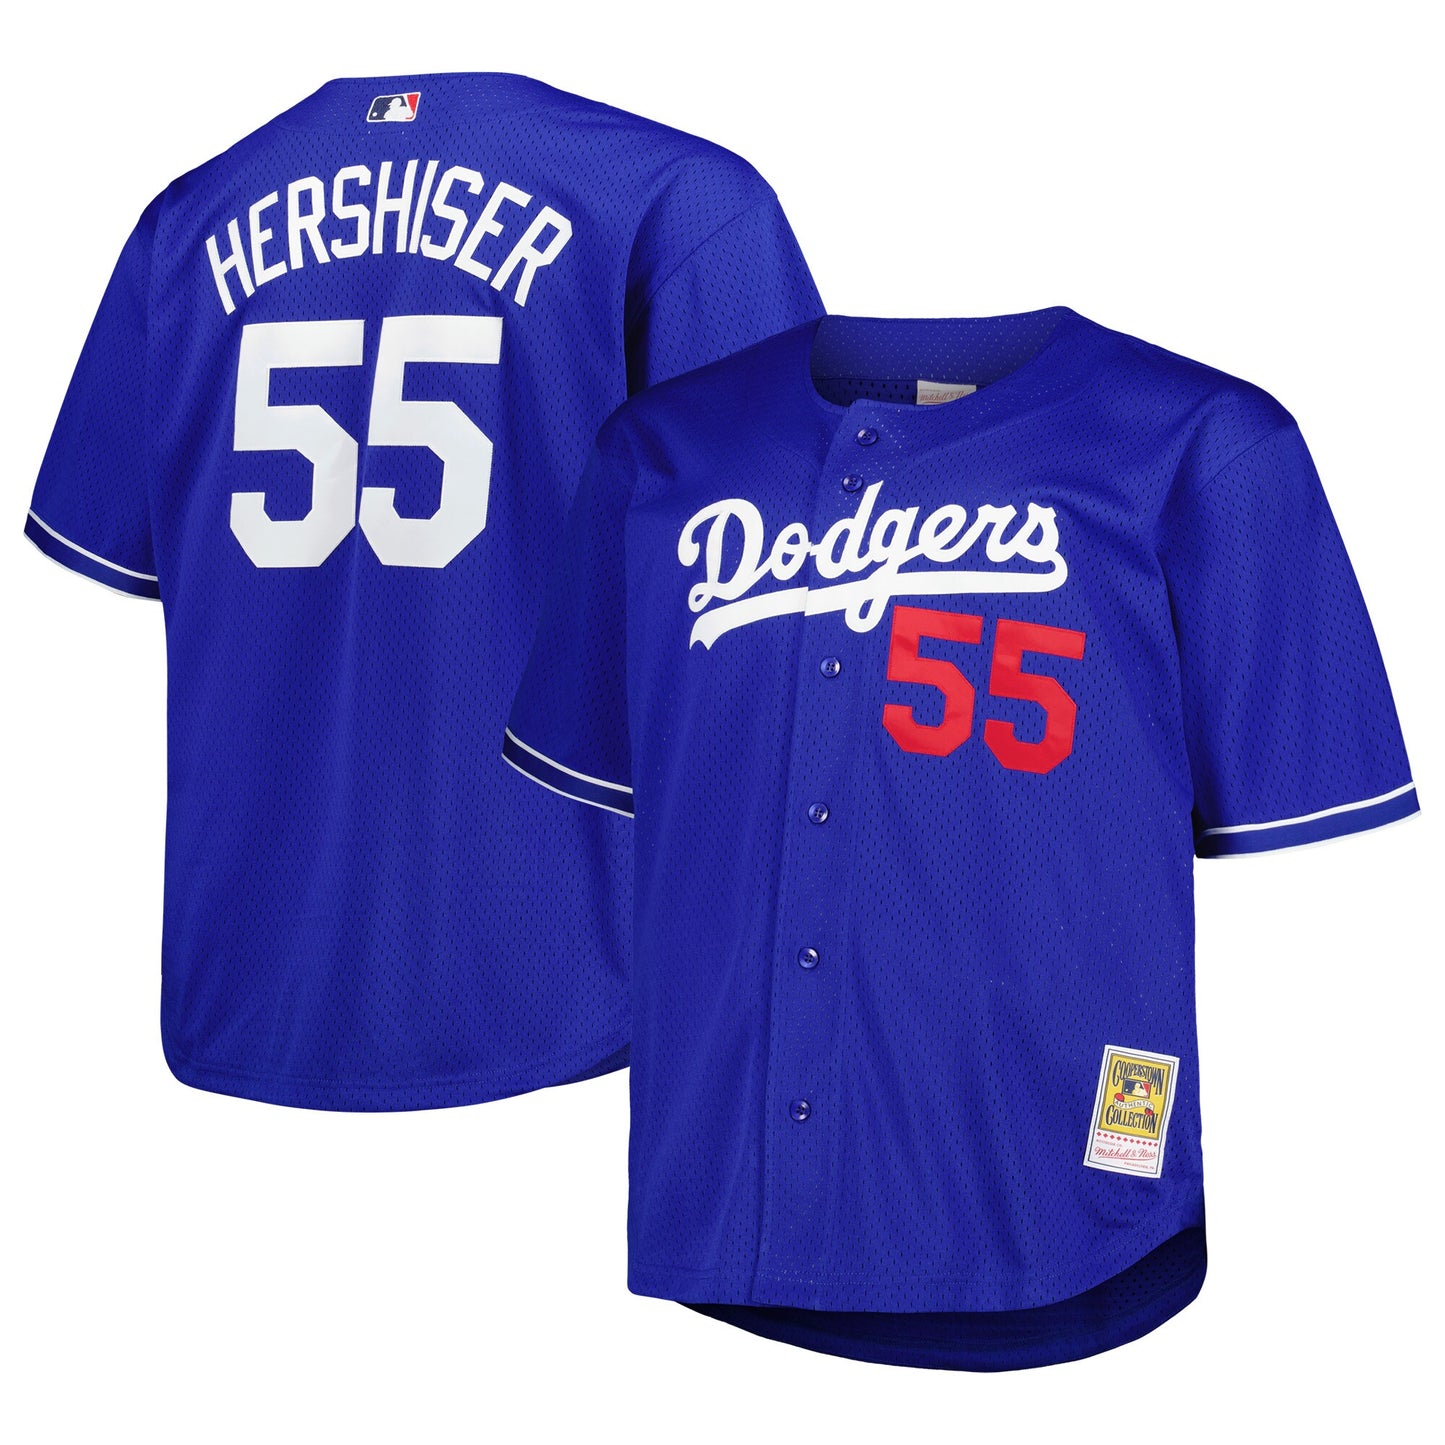 Orel Hershiser Los Angeles Dodgers Mitchell & Ness Big & Tall Cooperstown Collection Batting Practice Replica Jersey - Royal